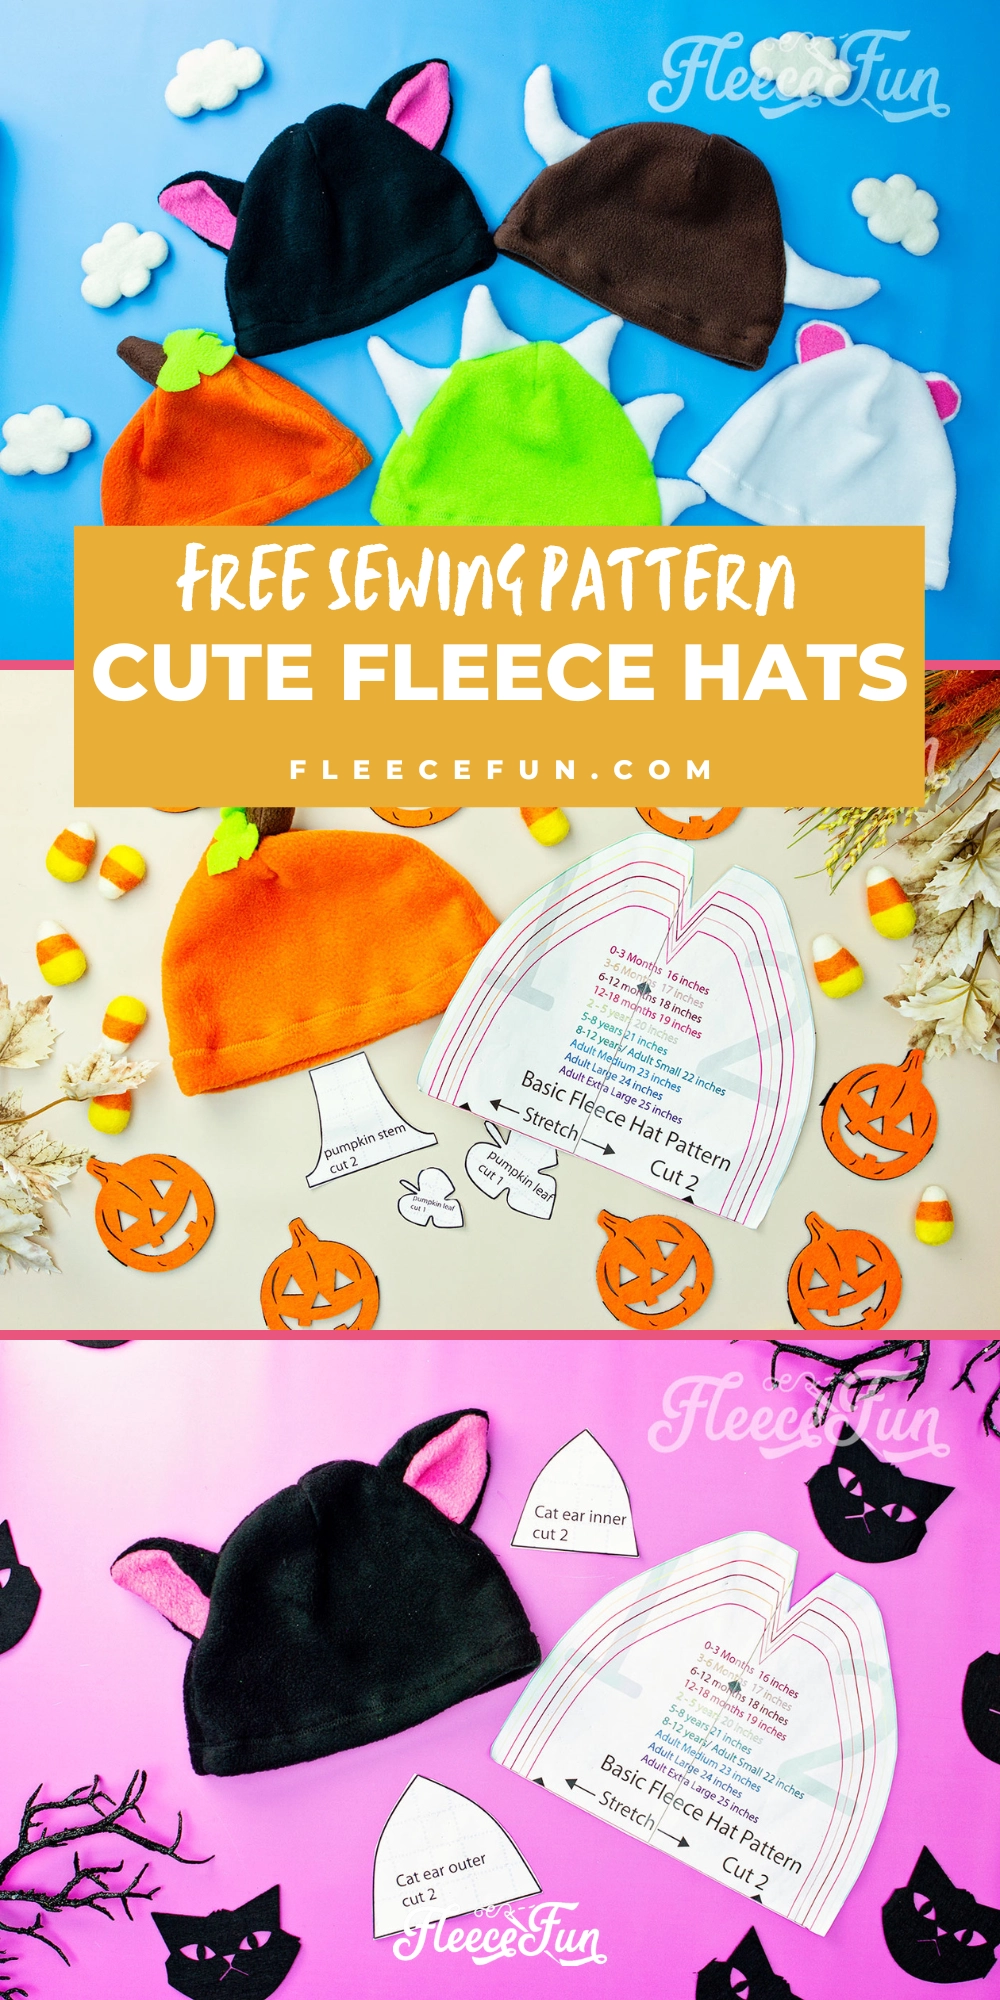 Whip up these adorable fleece hats in just 4 easy steps! With options like a daring Dinosaur or a cuddly Bear, these hats will keep everyone warm and happy. Perfect for Halloween or any chilly day – let’s stitch some smiles!